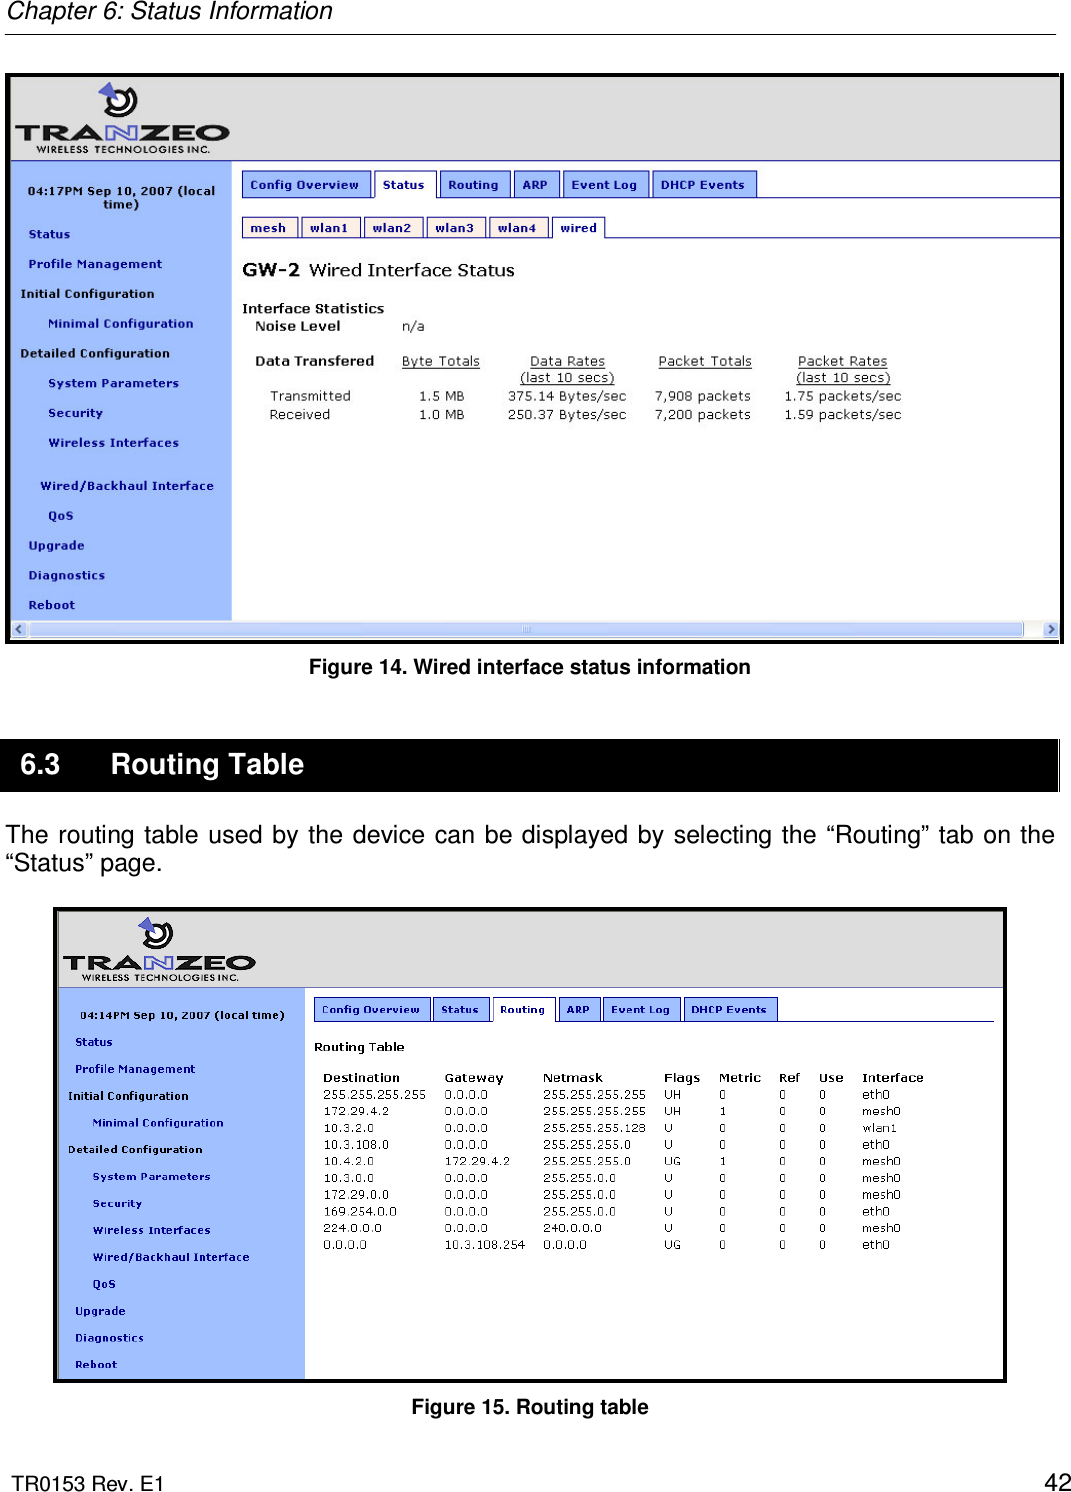 Chapter 6: Status Information  TR0153 Rev. E1    42  Figure 14. Wired interface status information 6.3  Routing Table The routing table used by the device can  be displayed  by selecting the “Routing” tab on the “Status” page.   Figure 15. Routing table 